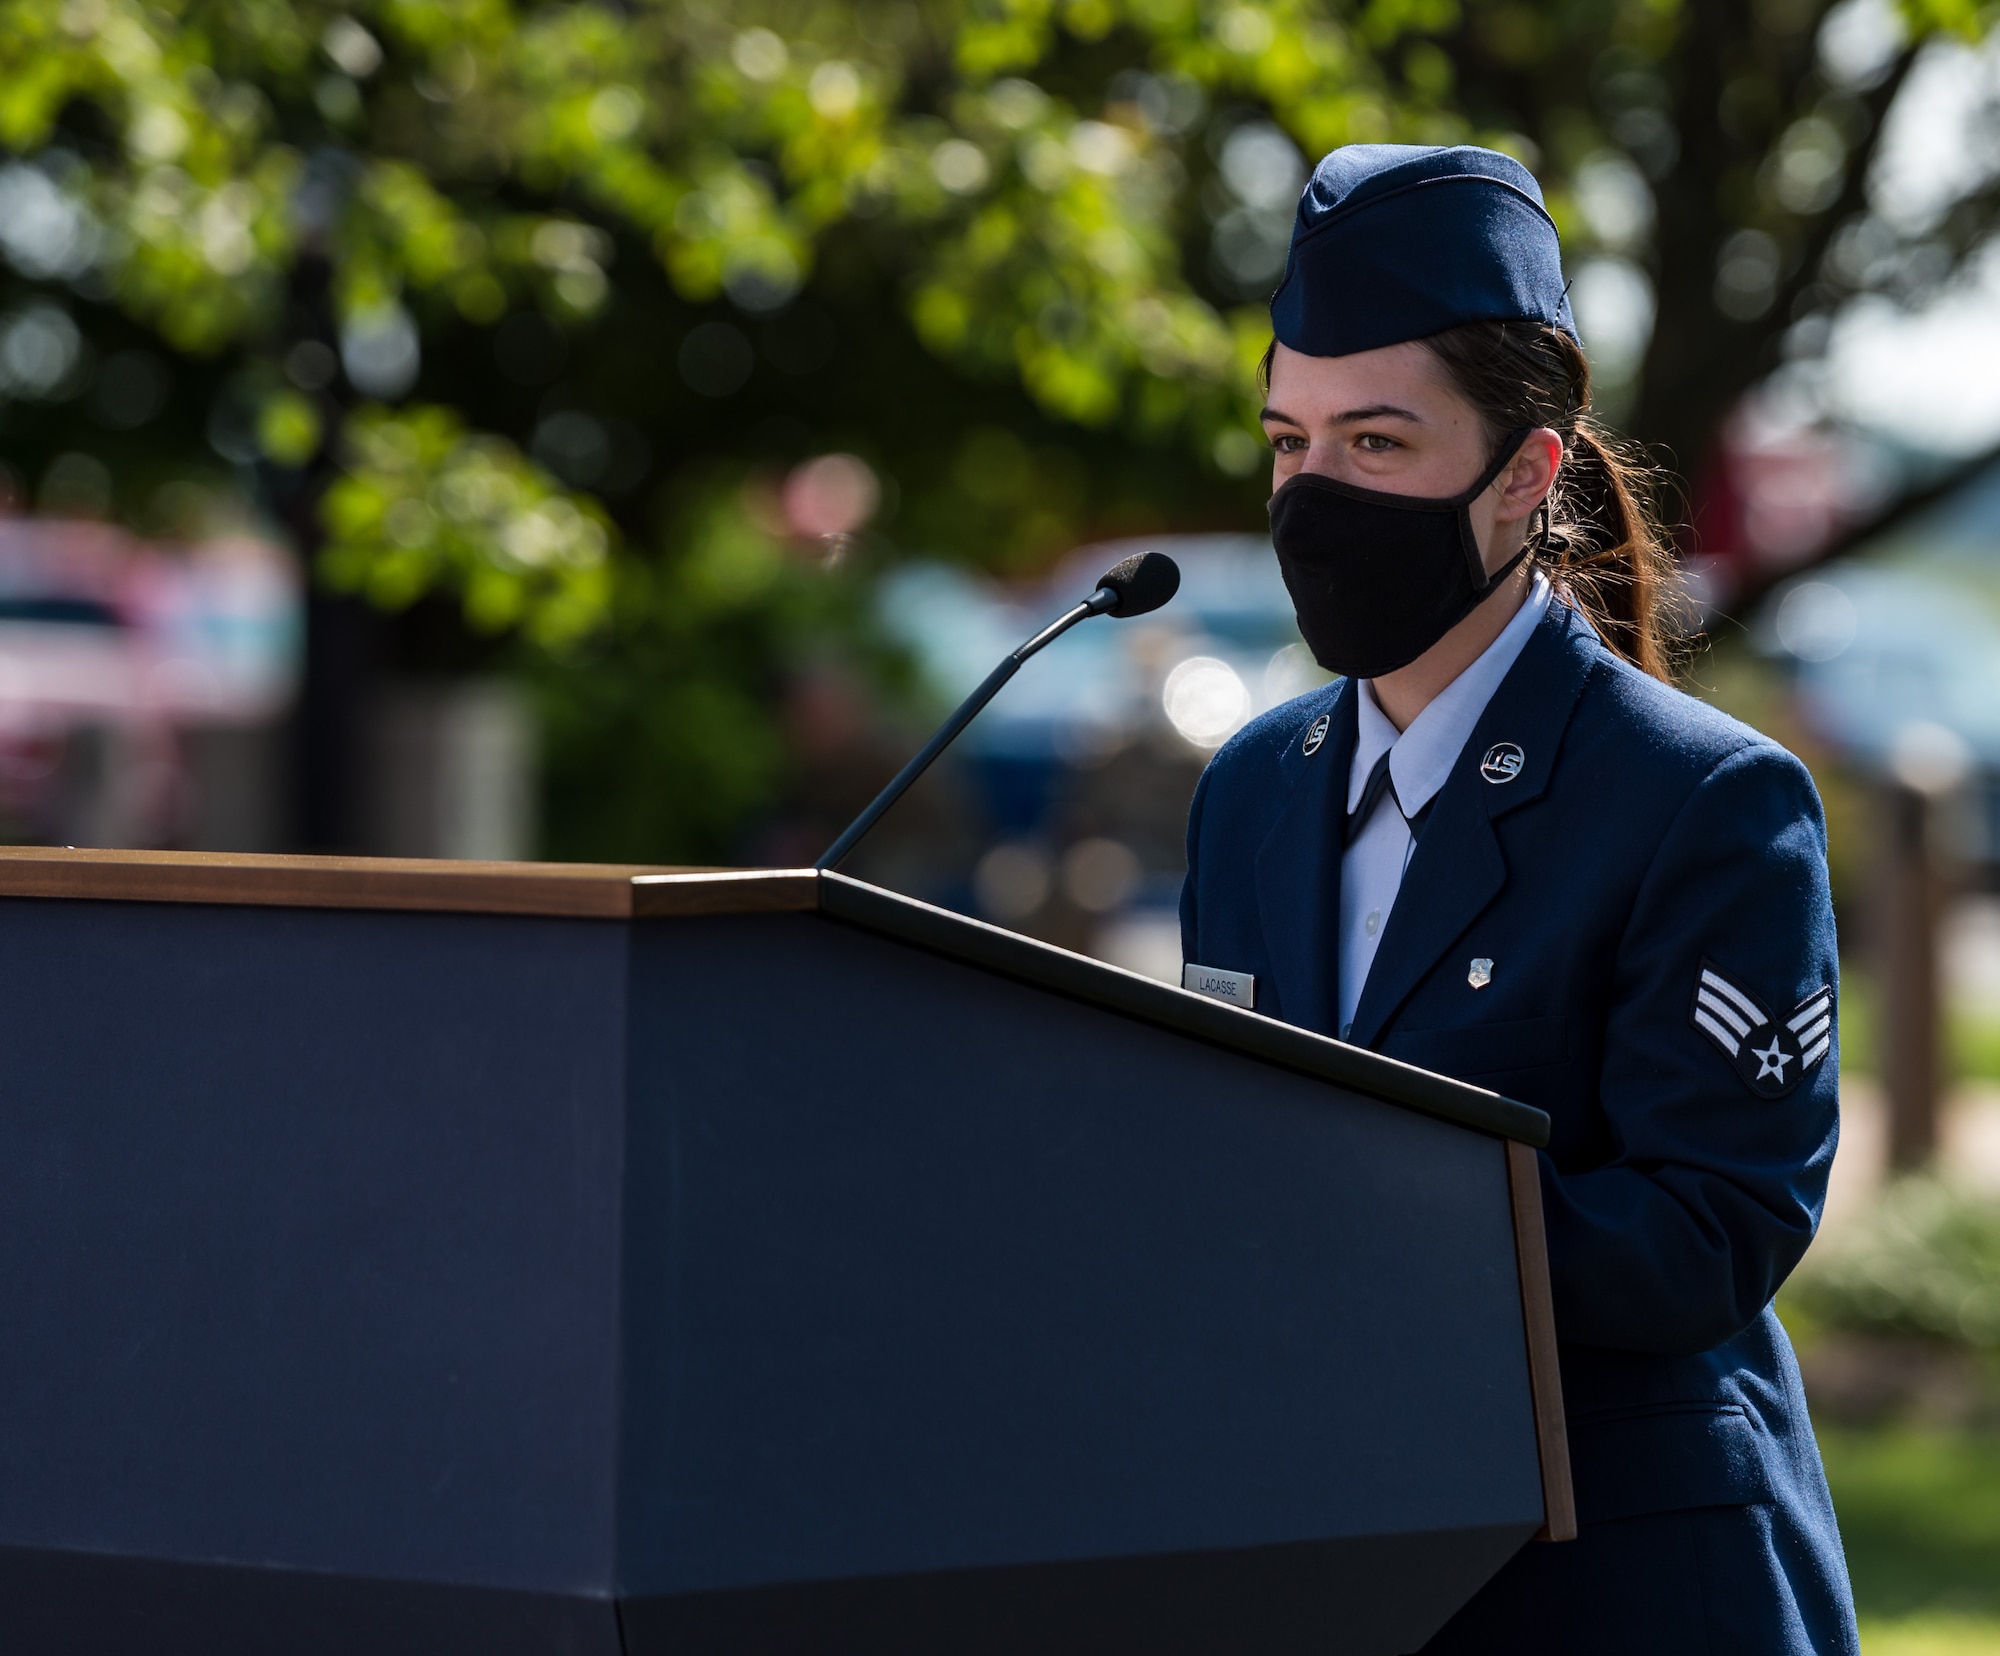 Senior Airman Kathleen Lacasse, 436th Health Care Operations Squadron ambulance response unit member, reads the Emergency Medical Technician Prayer during the 20th Anniversary 9/11 Remembrance Ceremony held at the Air Mobility Command Museum’s 9/11 Memorial on Dover Air Force Base, Delaware, Sept. 11, 2021. Lacasse read the prayer to honor the eight paramedics who died while responding to the terrorist attacks on the World Trade Center in New York Sept. 11, 2001. (U.S. Air Force photo by Roland Balik)